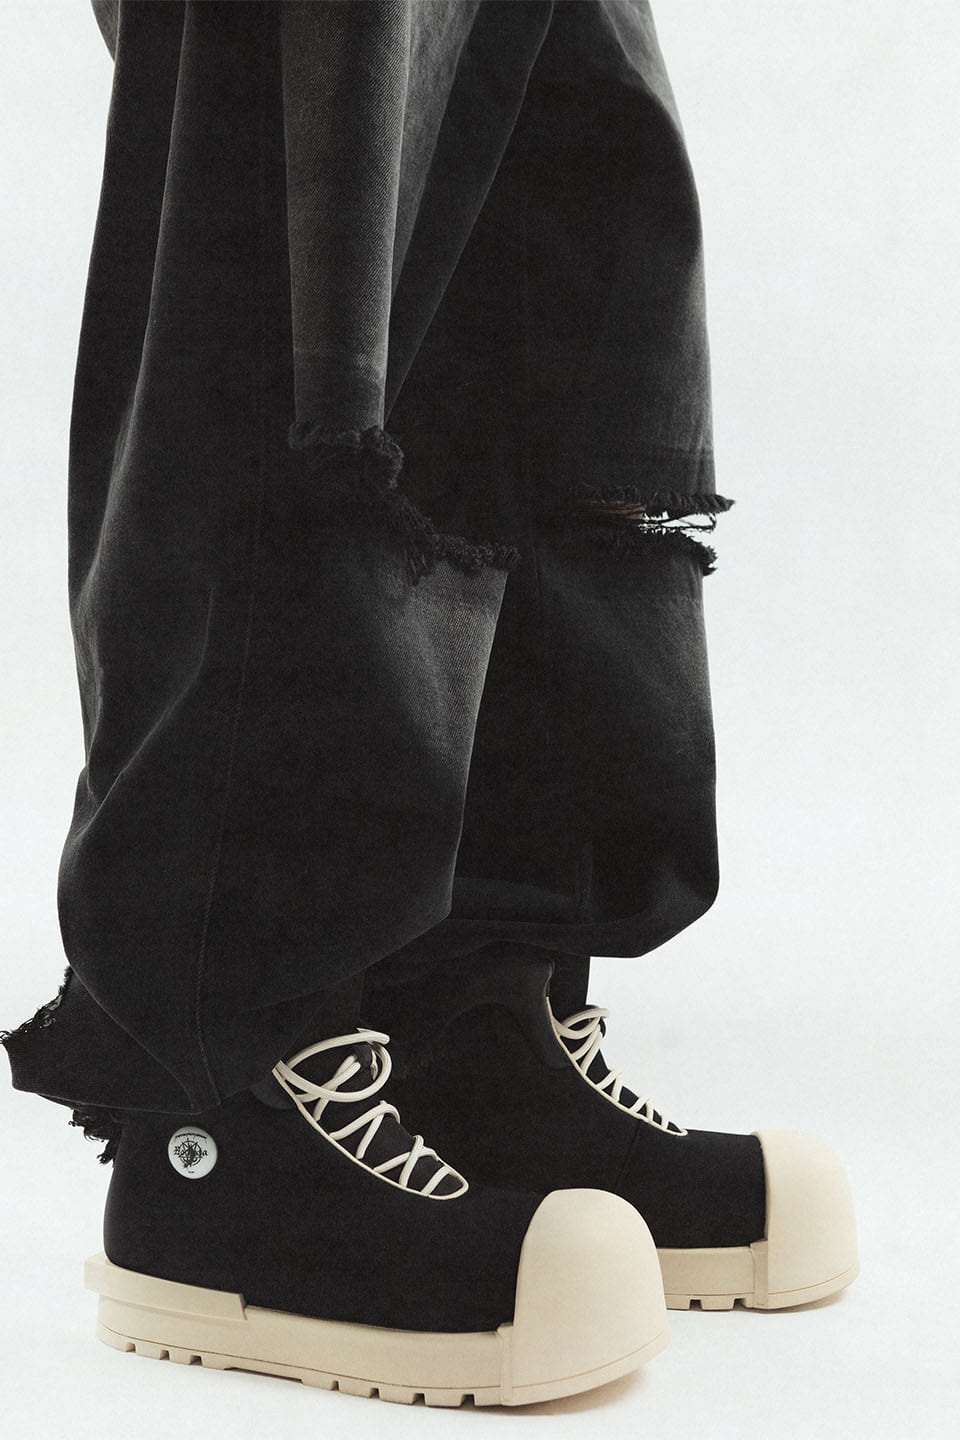 FVVO Thick Soled High Top Boots 即完売品hififnk